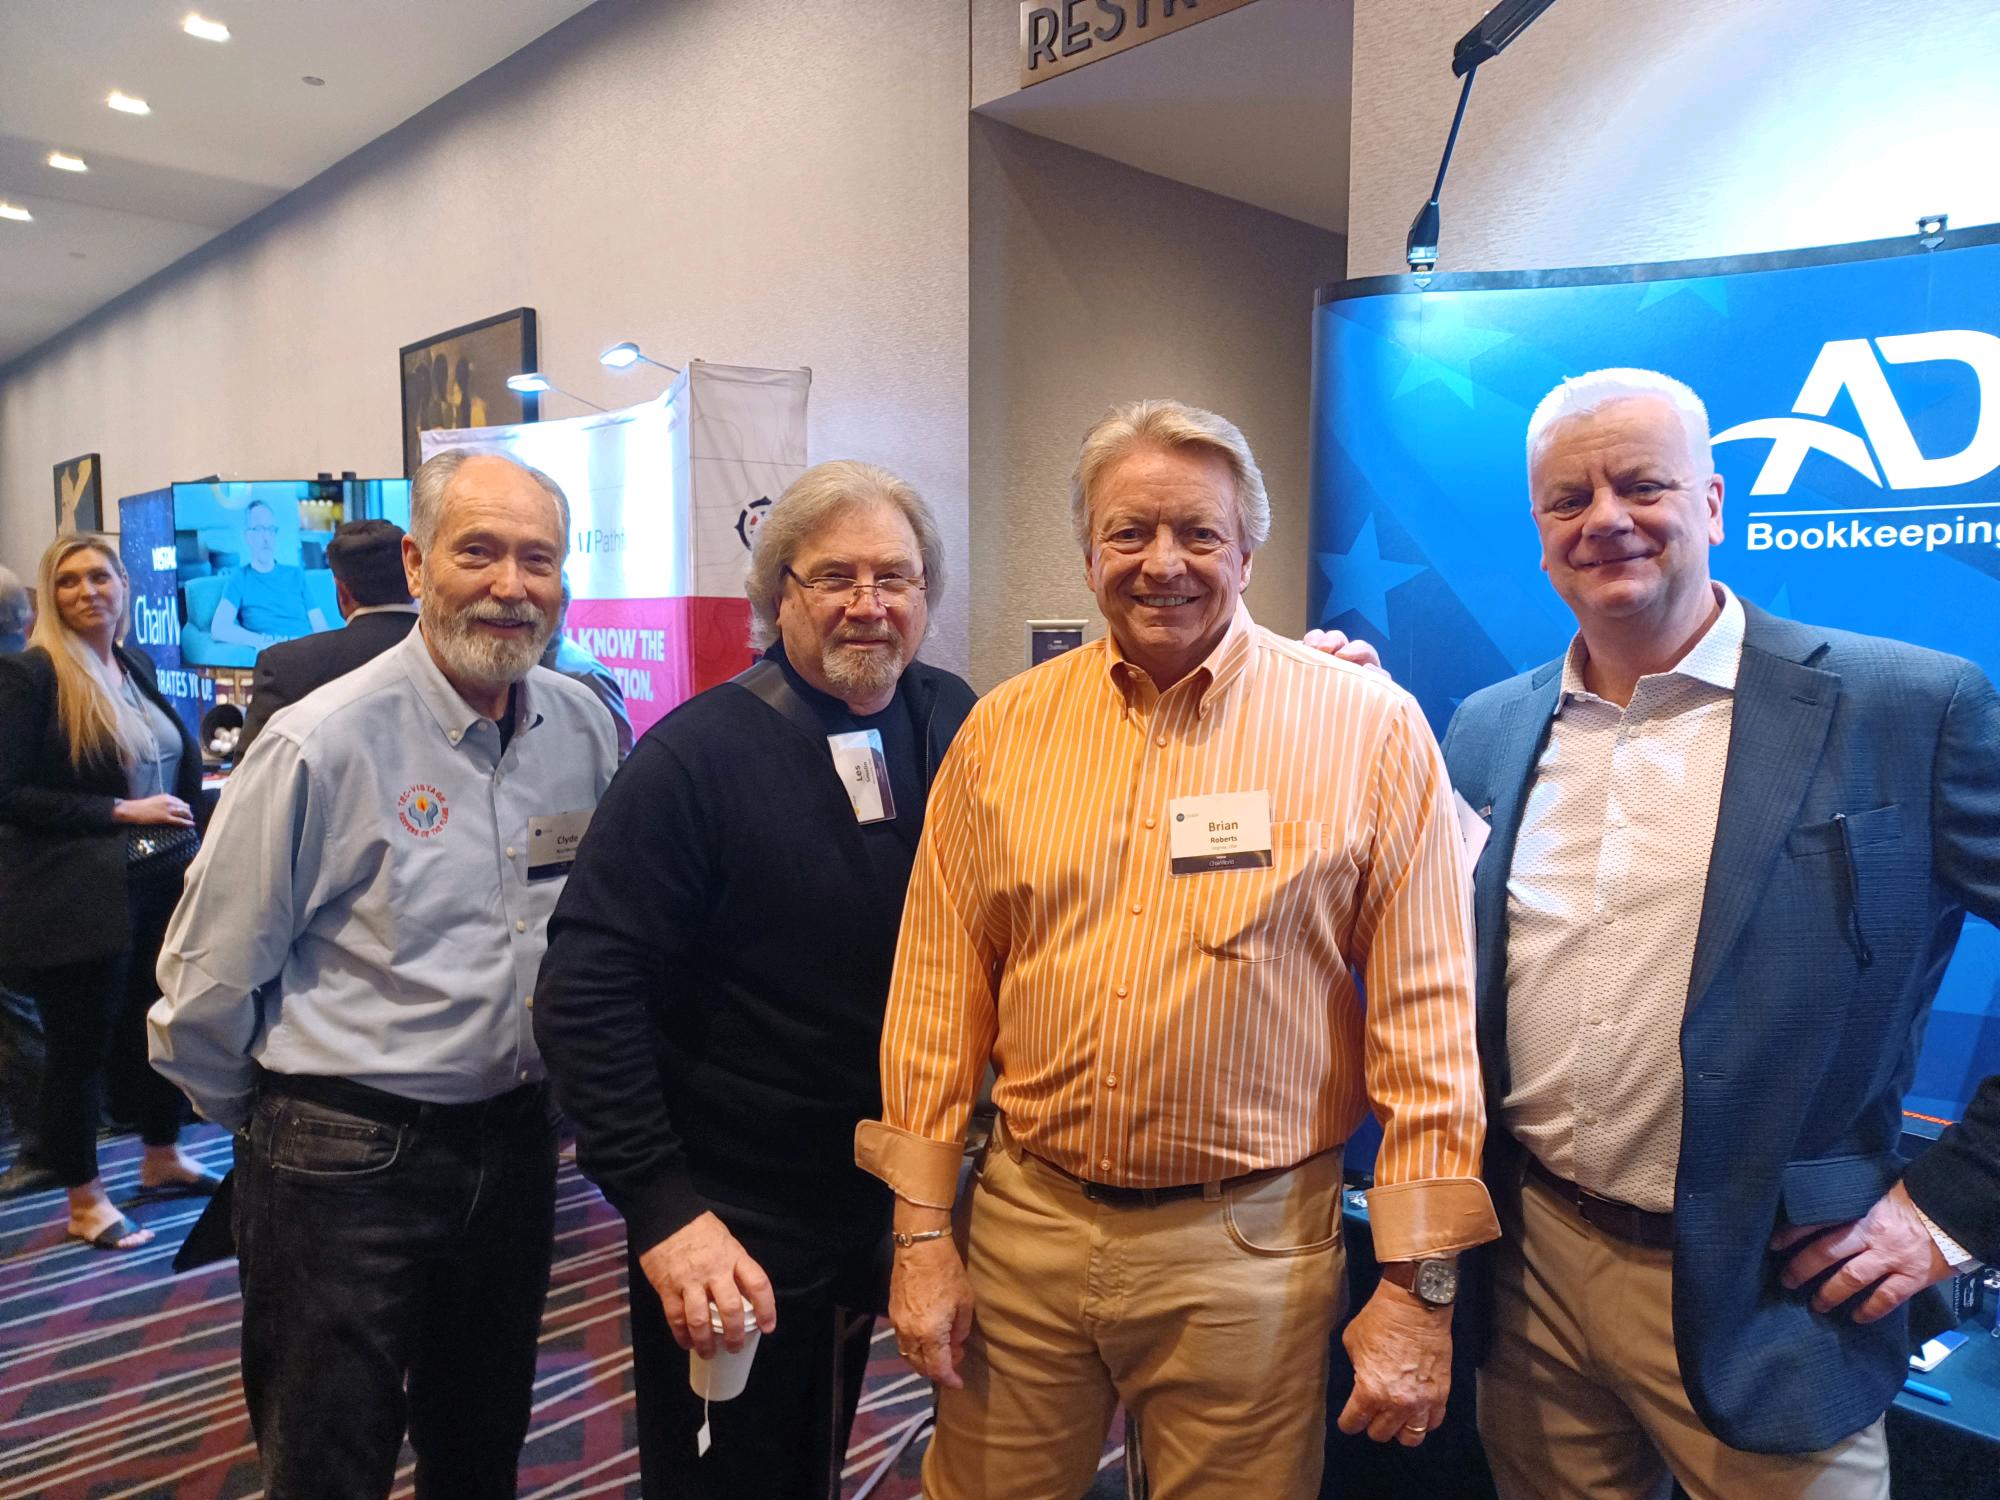 ADC Evangelists, Les Smolin,  Brian Roberts and Clyde Northrop